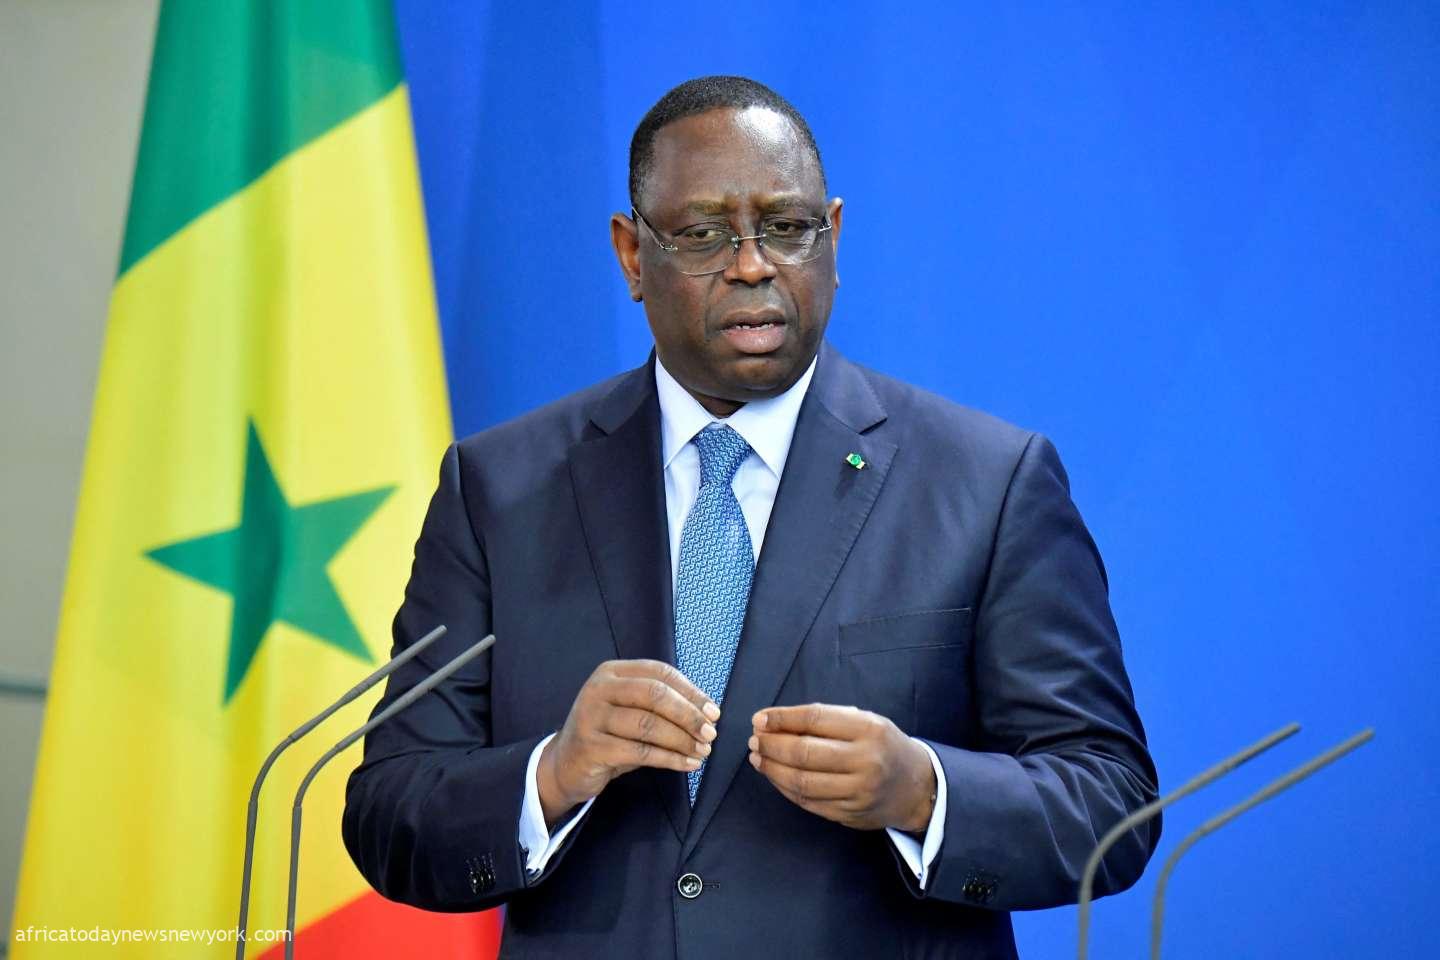 Under-Fire Senegal’s President Agrees To Step Down In April